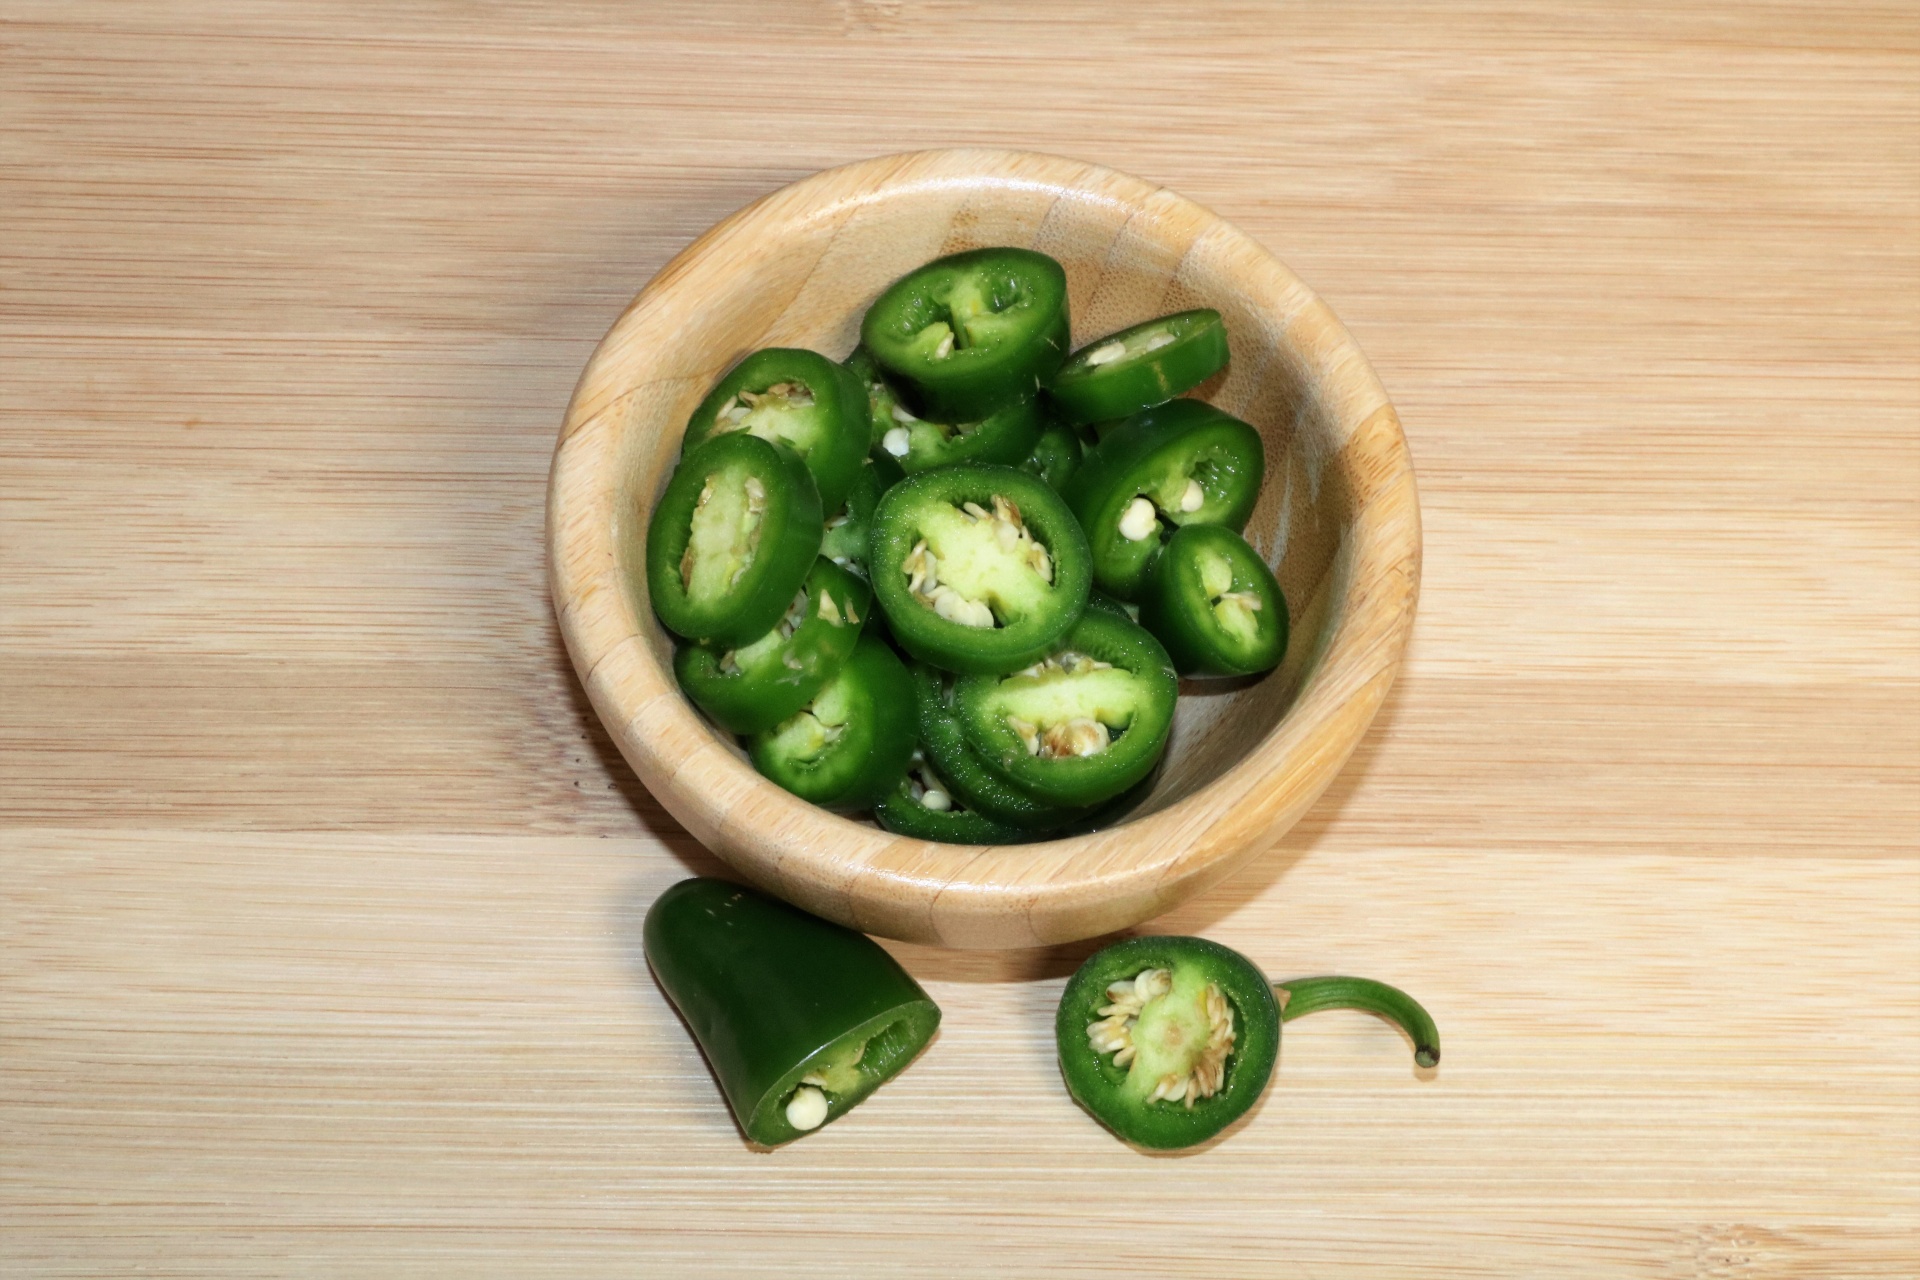 A small wooden bowl is filled with sliced green jalapeno peppers, sitting on a light brown wooden cutting board.